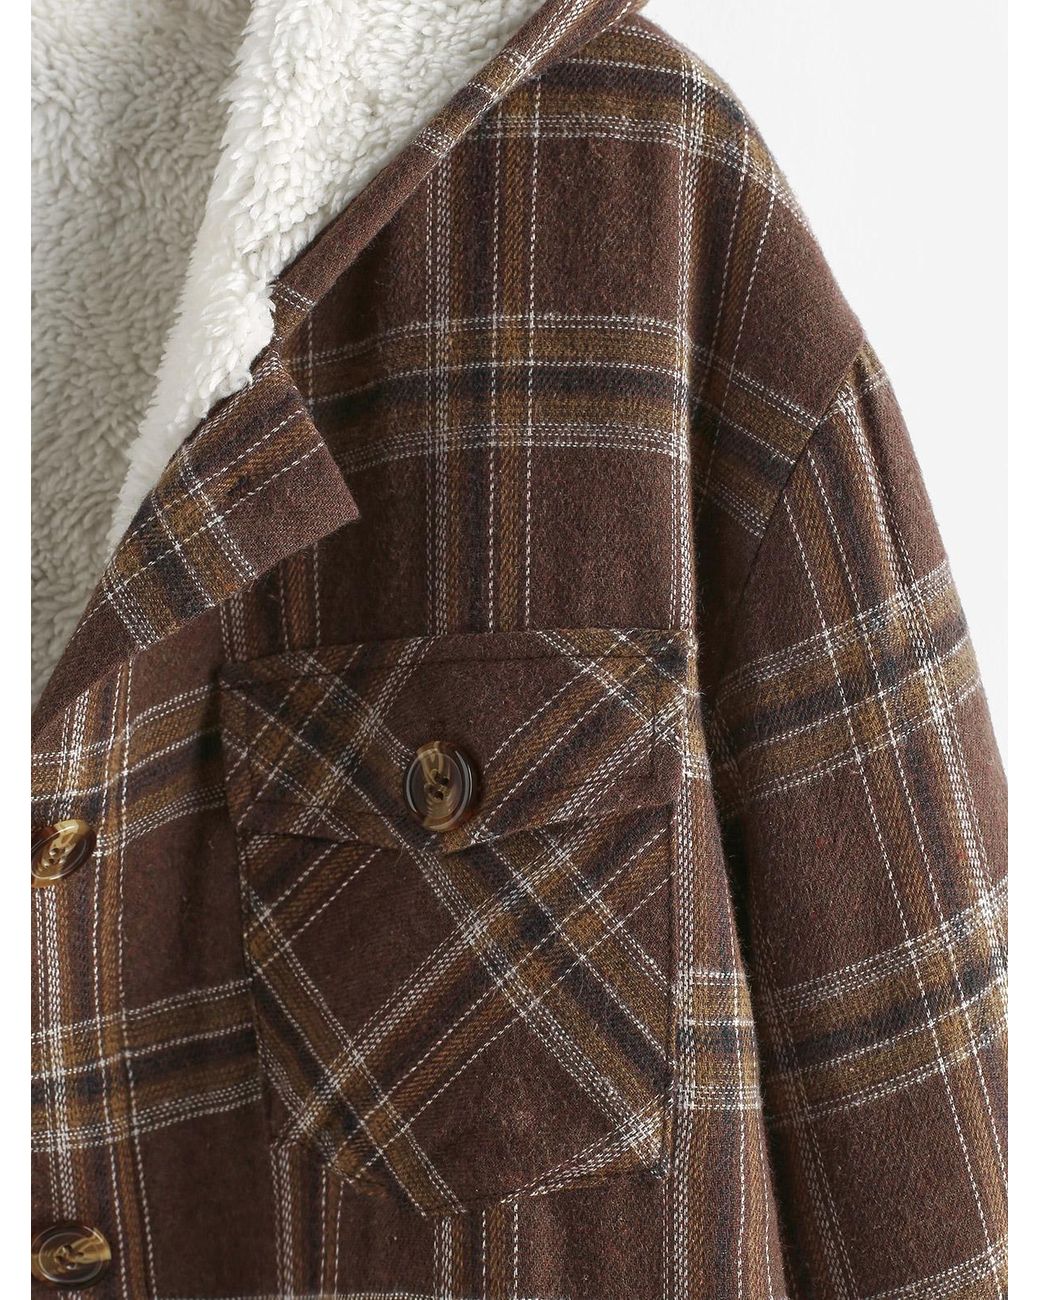 Zaful Jackets Fuzzy Flannel Plaid Fluffy Faux Shearling Lined Hooded Coat  in Deep Coffee (Brown) | Lyst